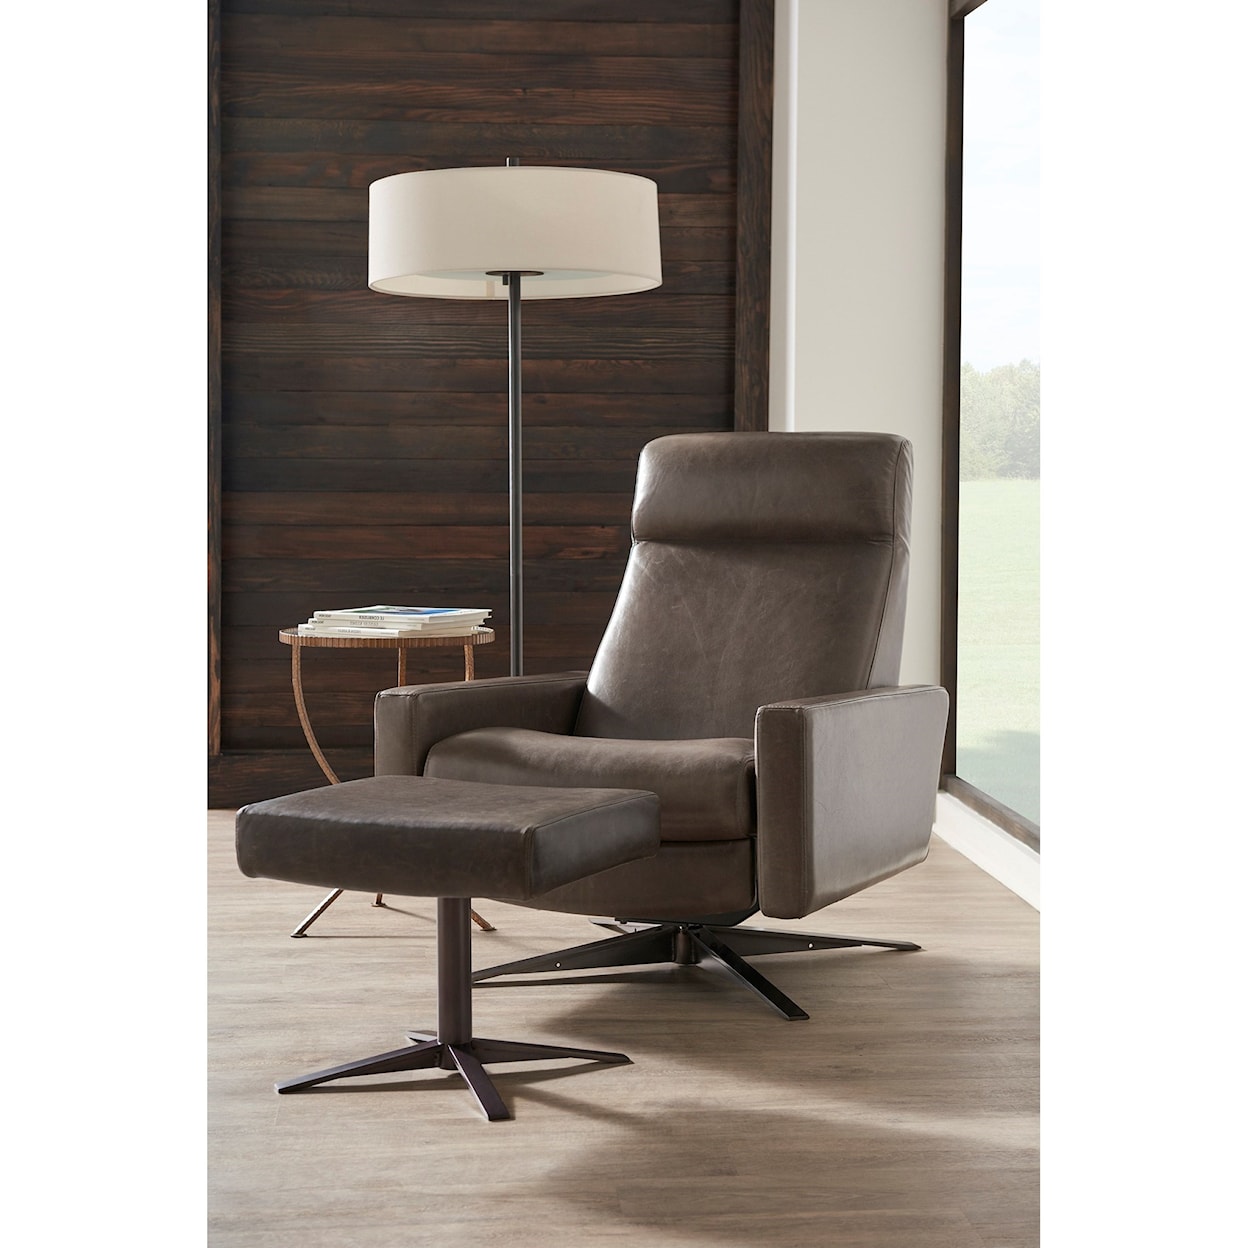 American Leather Cloud Large Pushback Chair